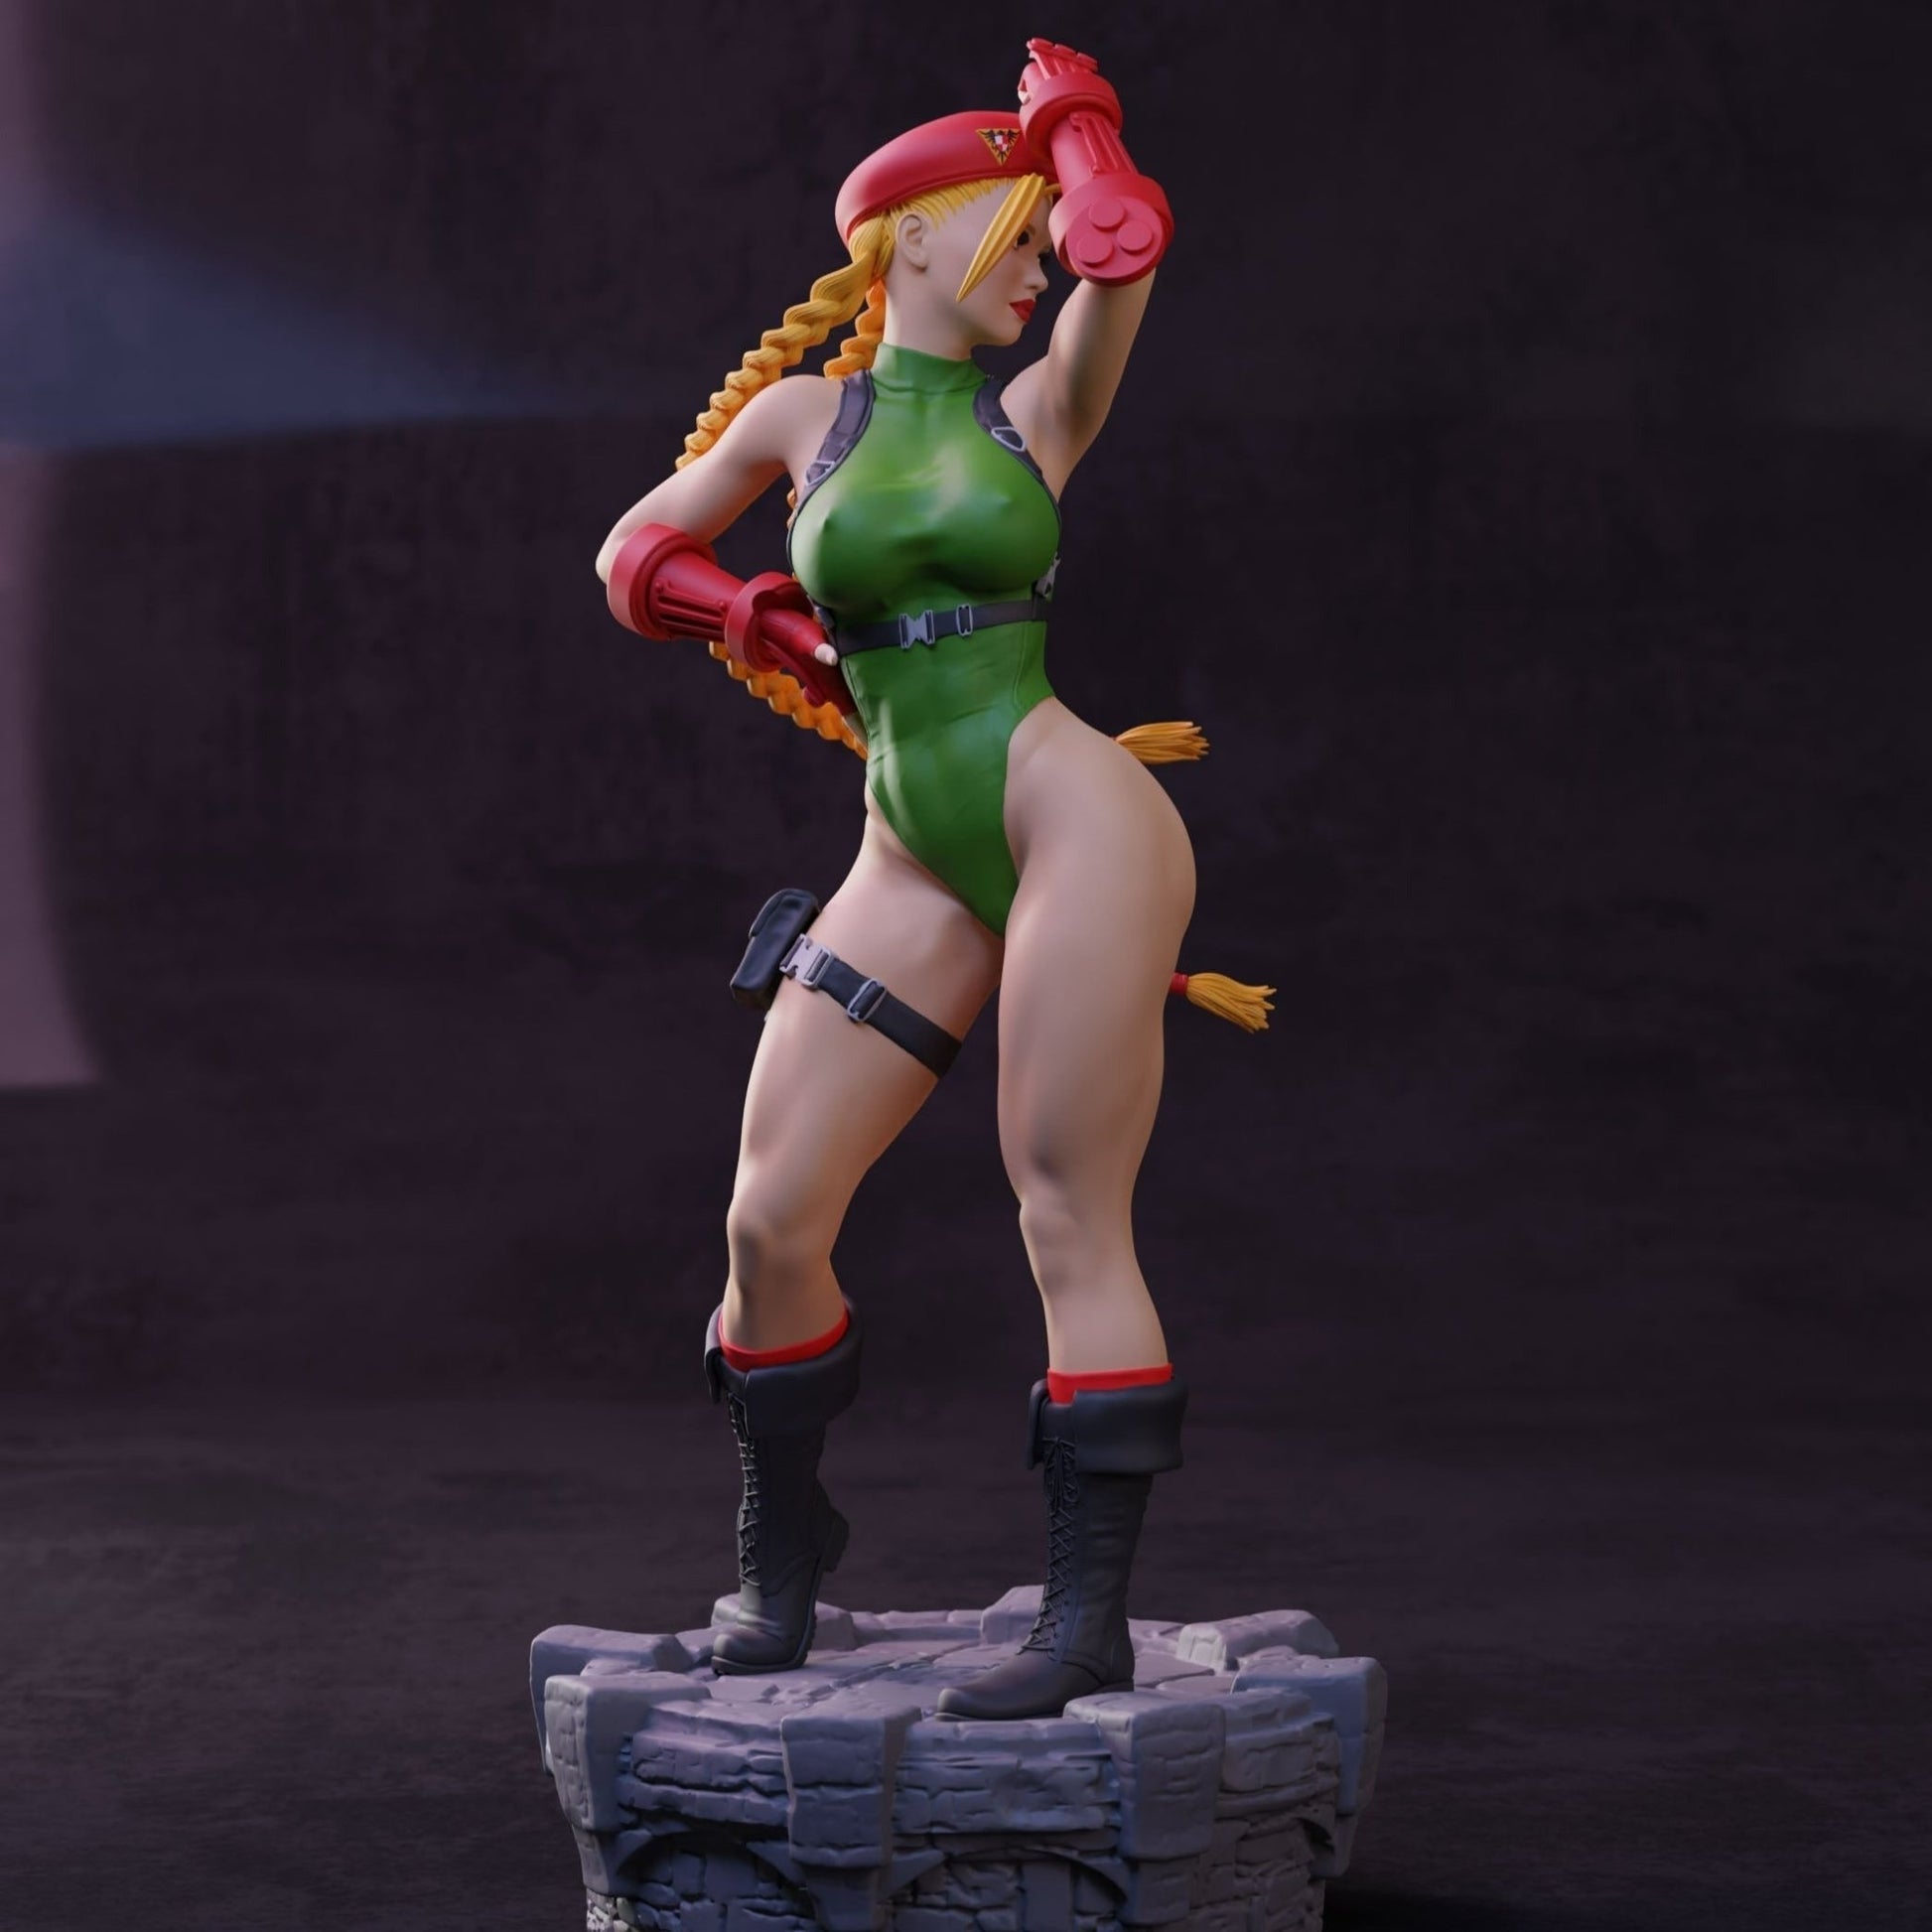 CAMMY 2 3D Printed Miniature FunArt Collectable by Abe3d